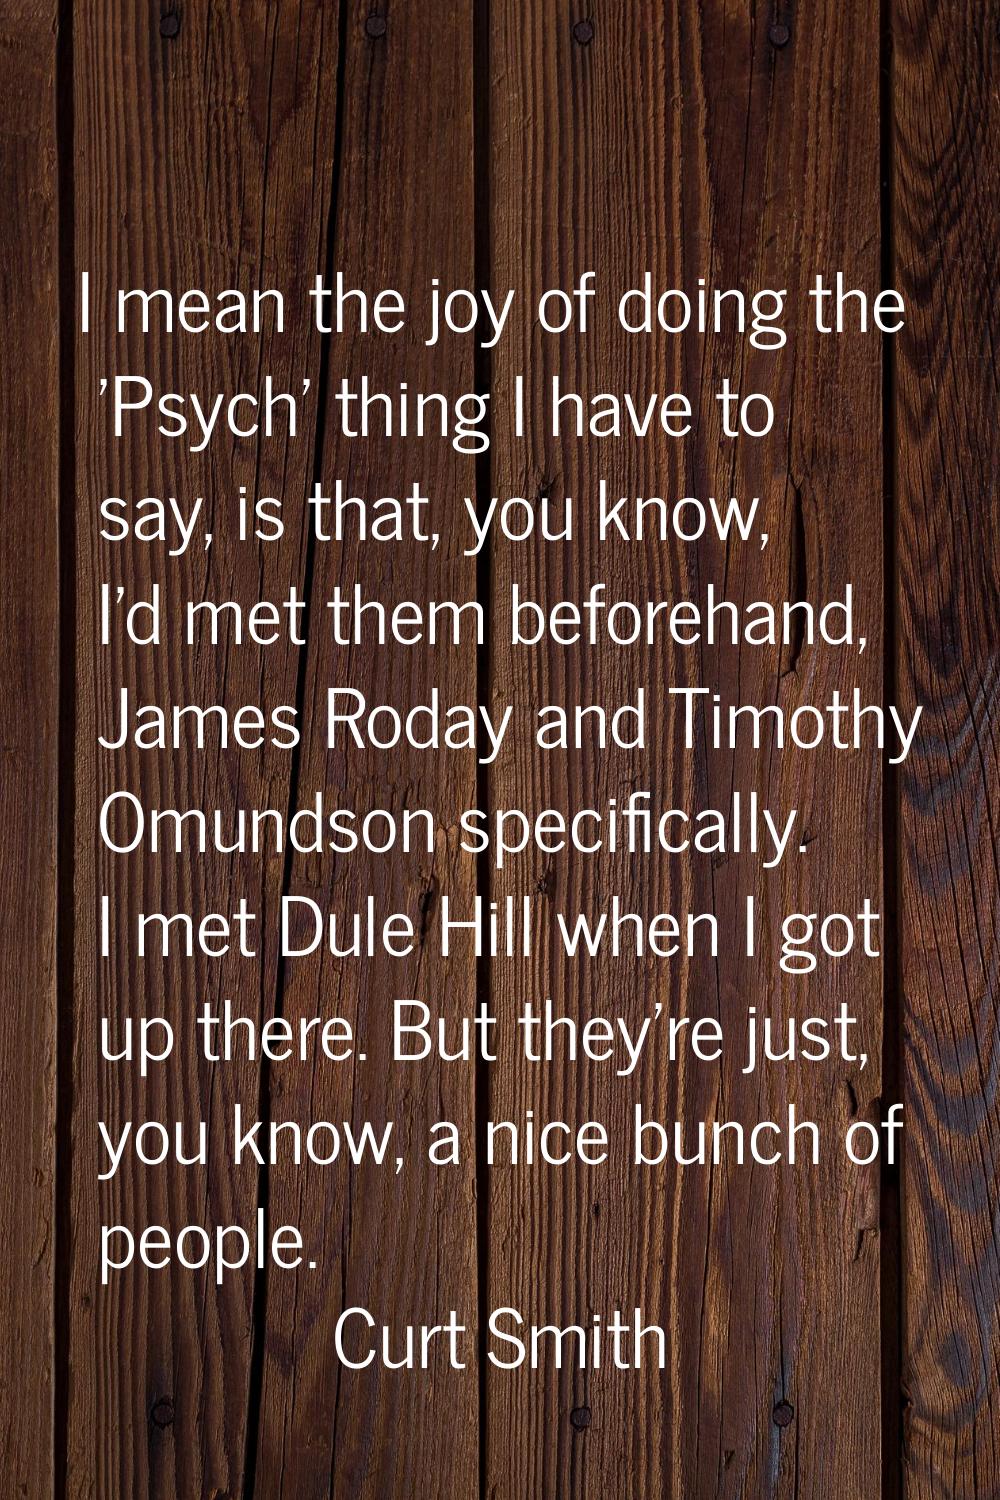 I mean the joy of doing the 'Psych' thing I have to say, is that, you know, I'd met them beforehand